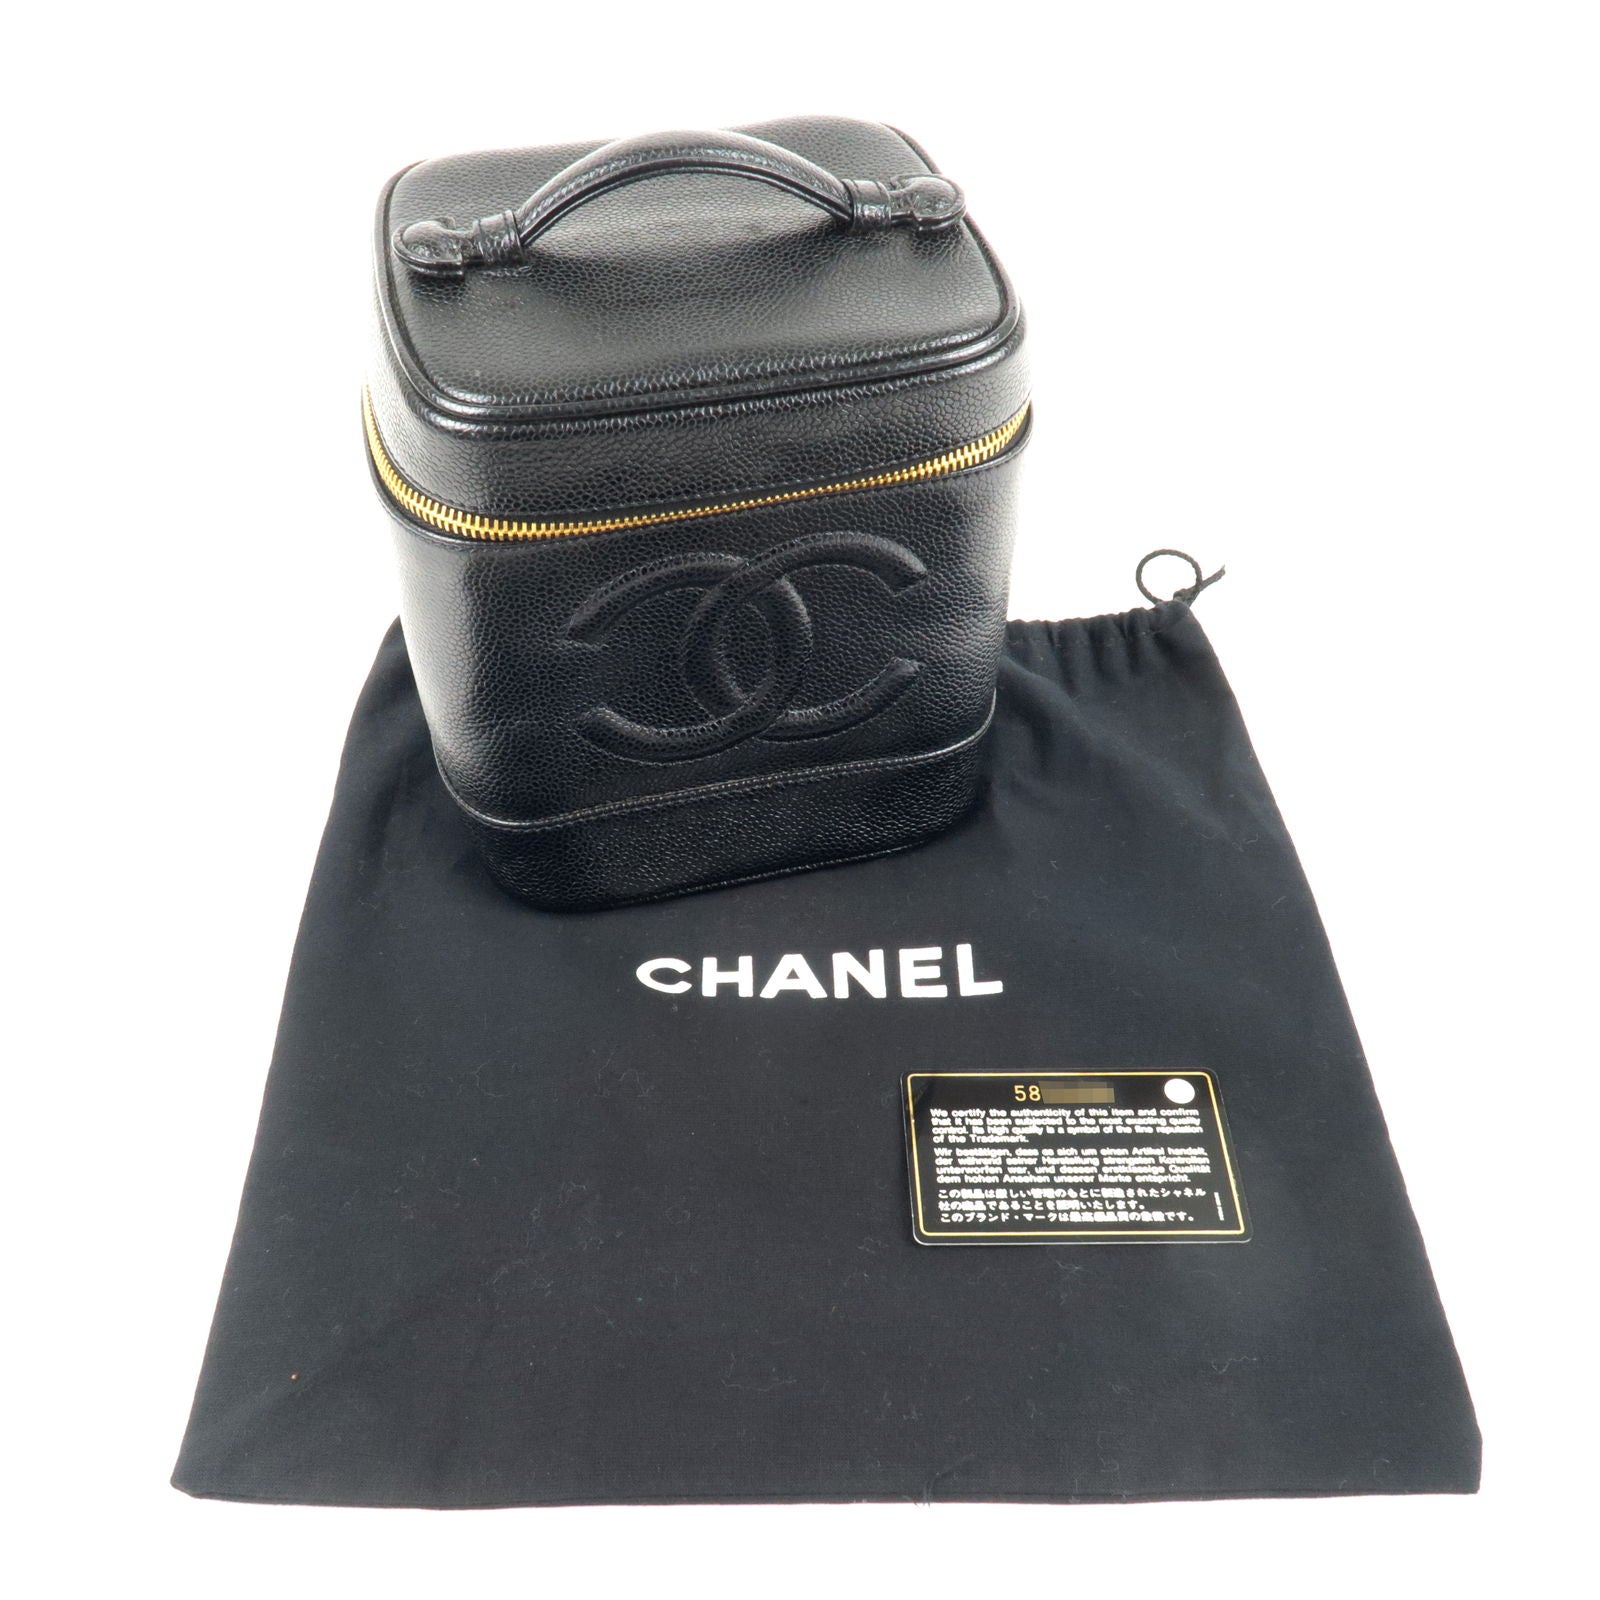 Cosmetic - Bag - CHANEL - Bag - Hand - Owned embellished globe earrings -  Black - A01998 – Chanel Pre - Bag - Chanel Gabrielle Wallet - Skin - Vanity  - Caviar